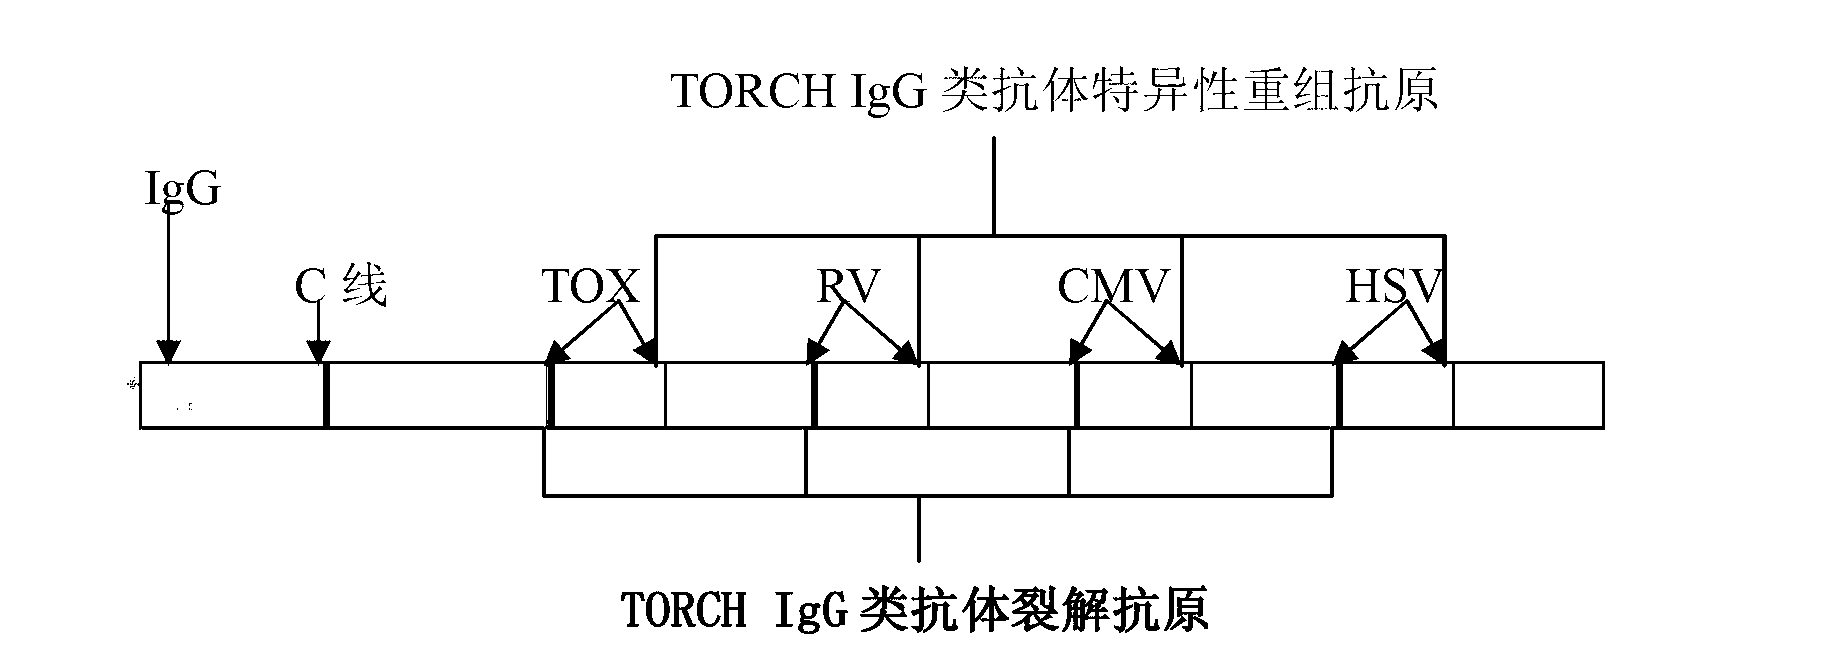 IgG antibody detection kit of TORCH five items and preparation of kit